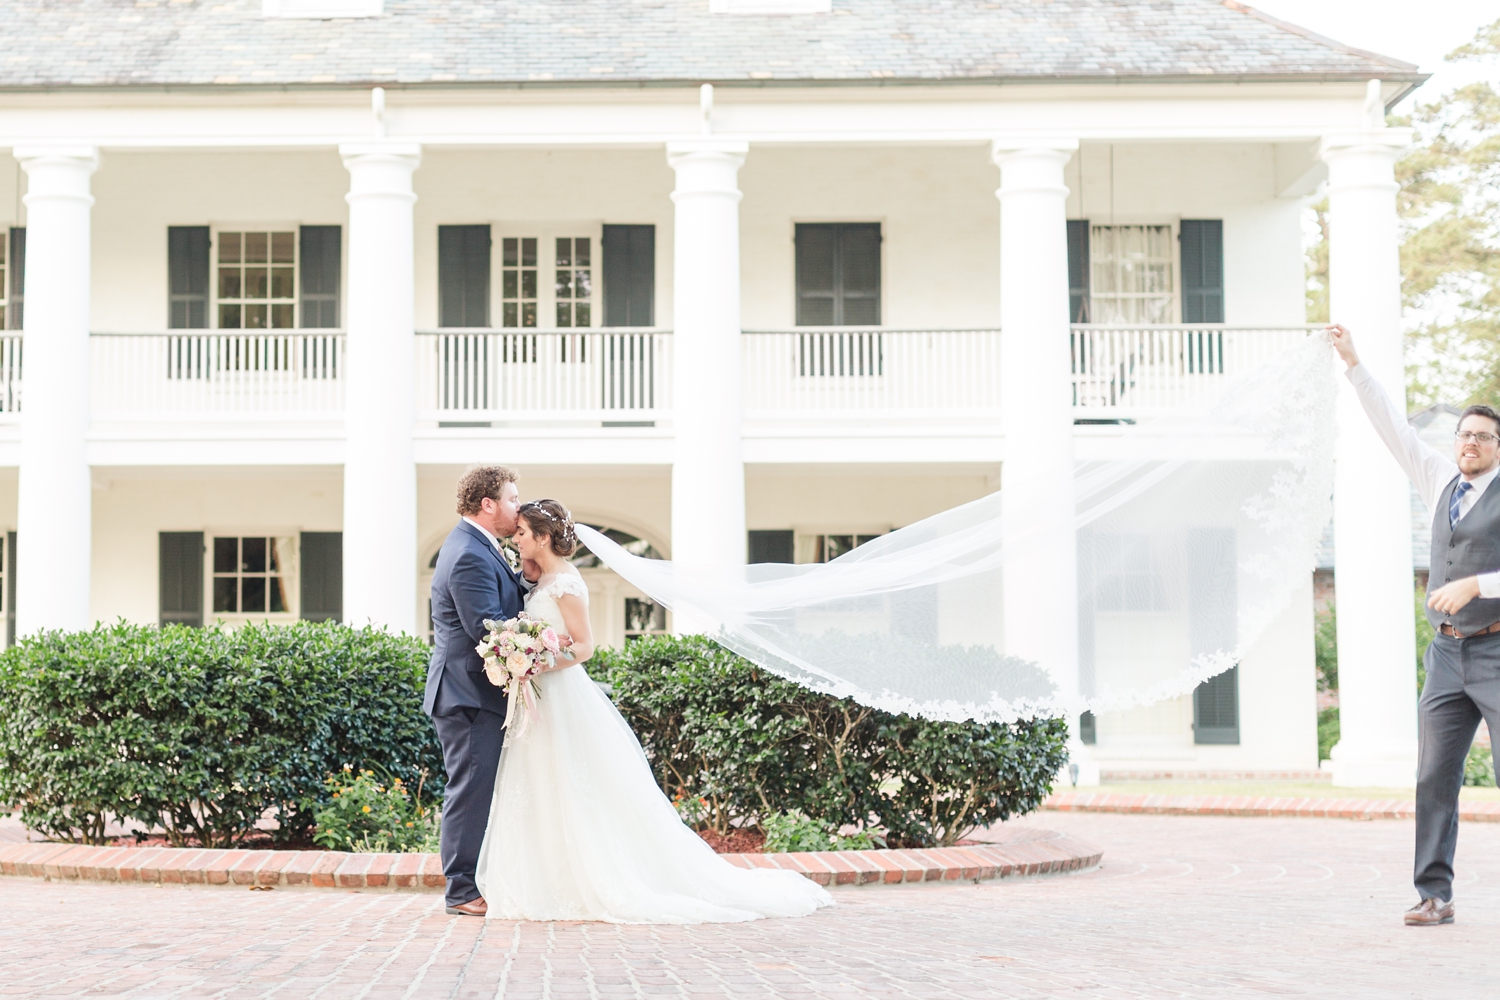  The classy veil throw. Love these gorgeous buildings in Louisiana! 